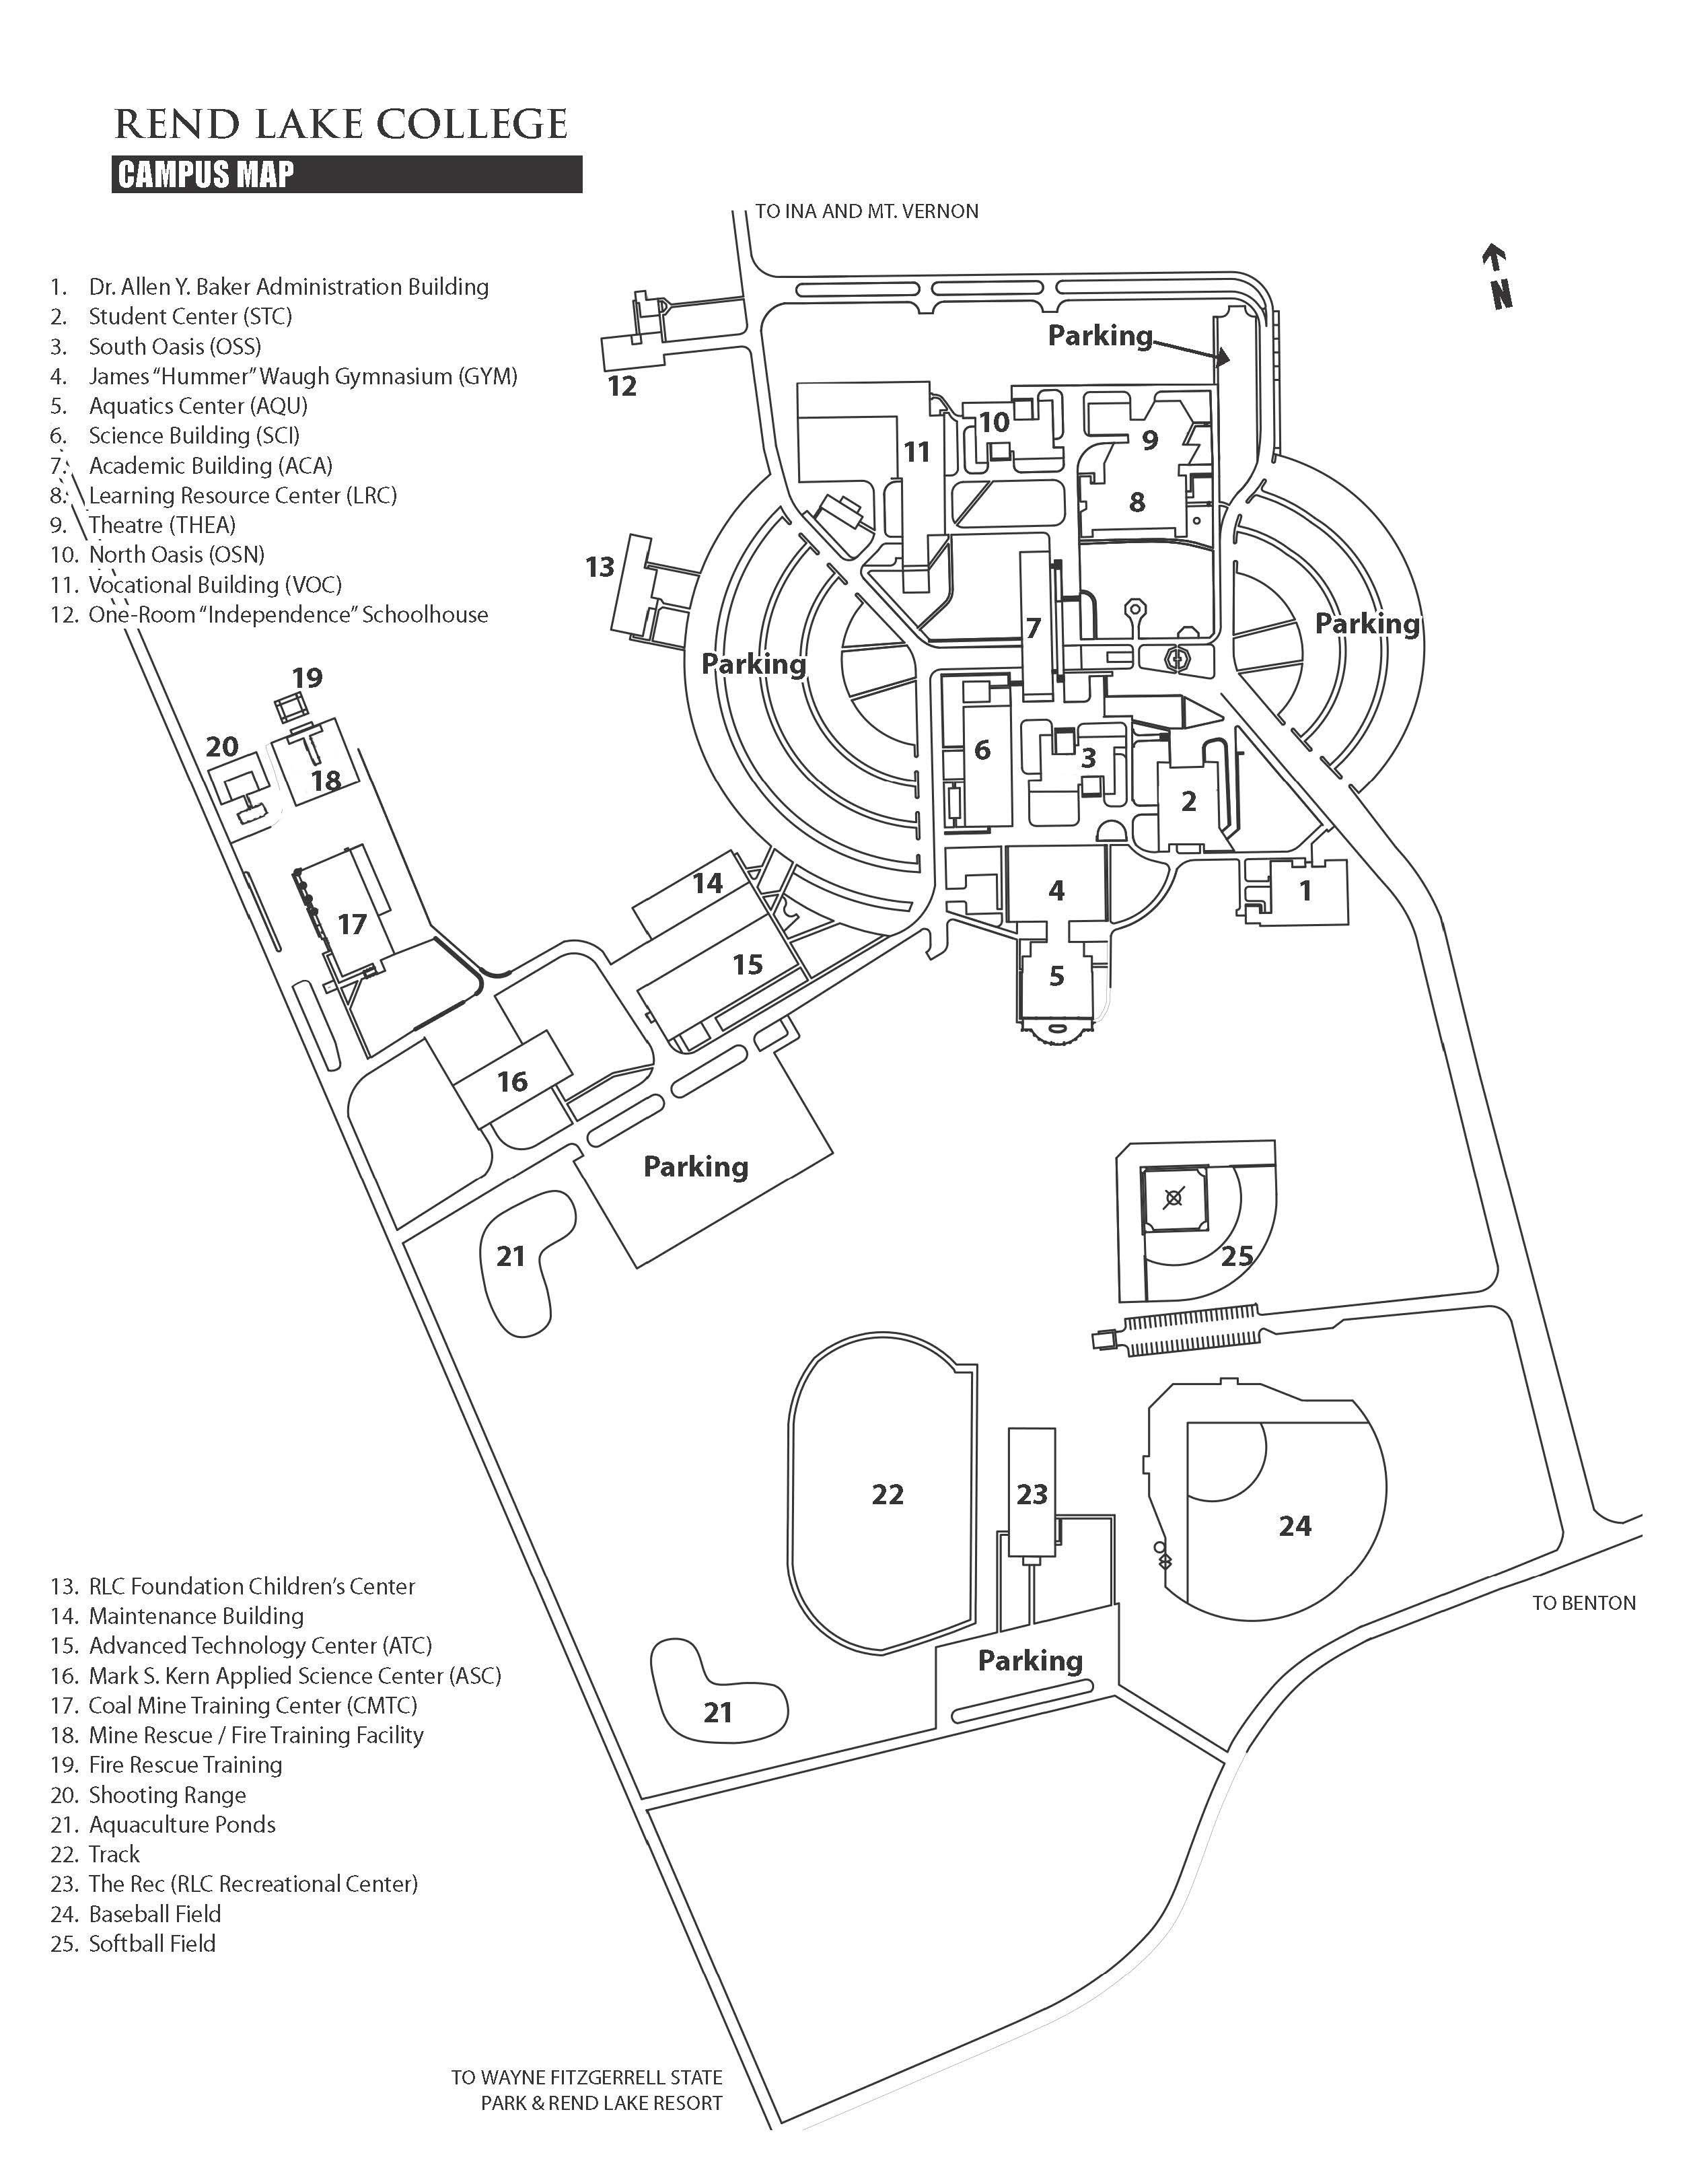 Campus Map - Rend Lake College